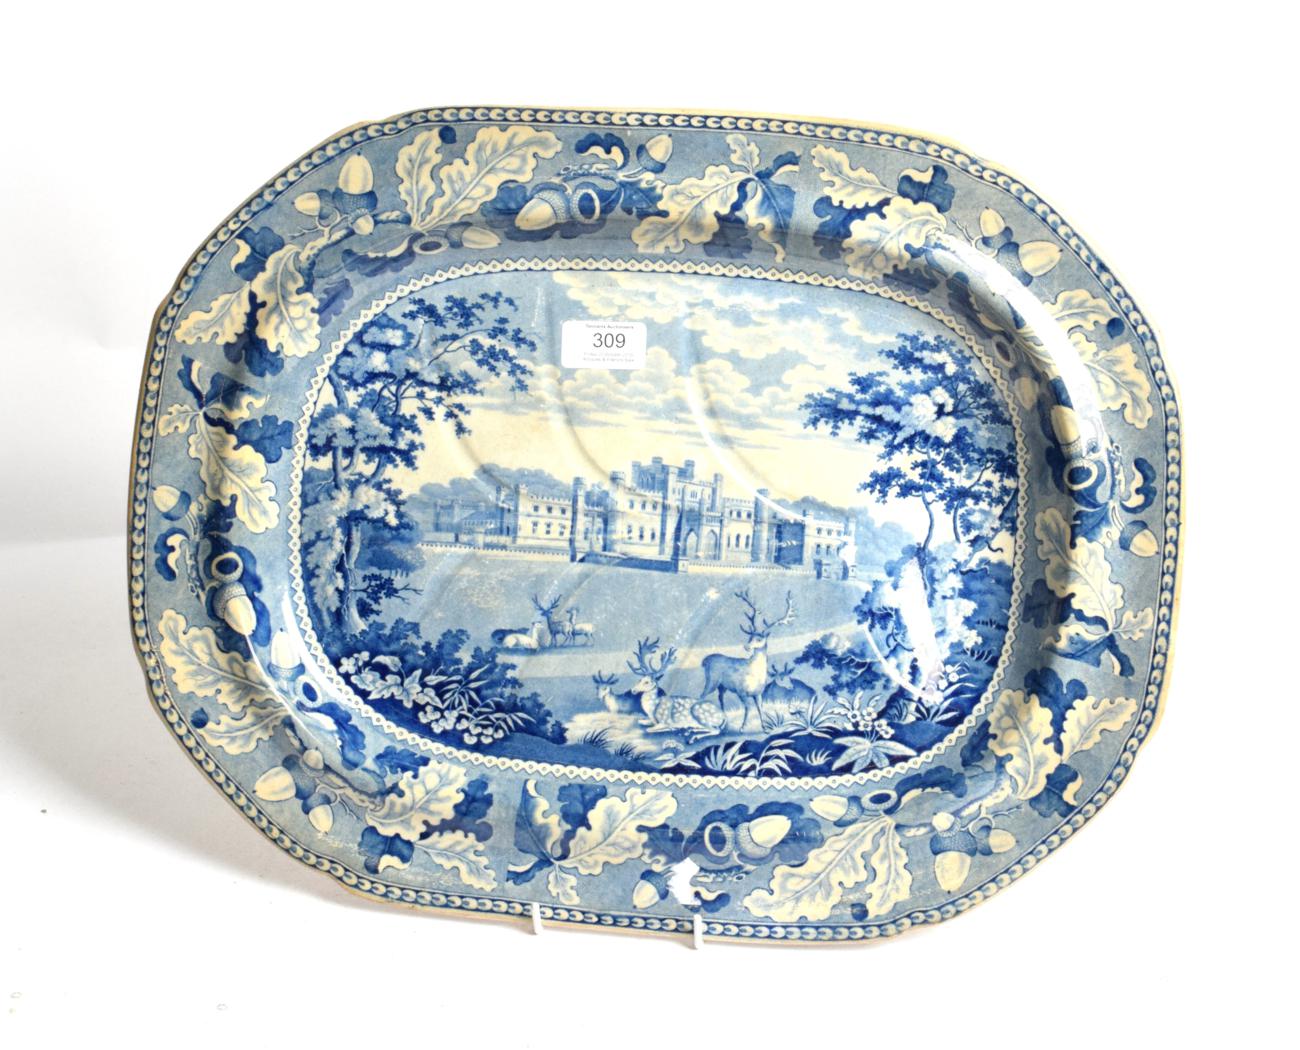 Lot 309 - A Staffordshire pearl ware meat platter, circa 1820, printed in underglaze blue with Lowther Castle